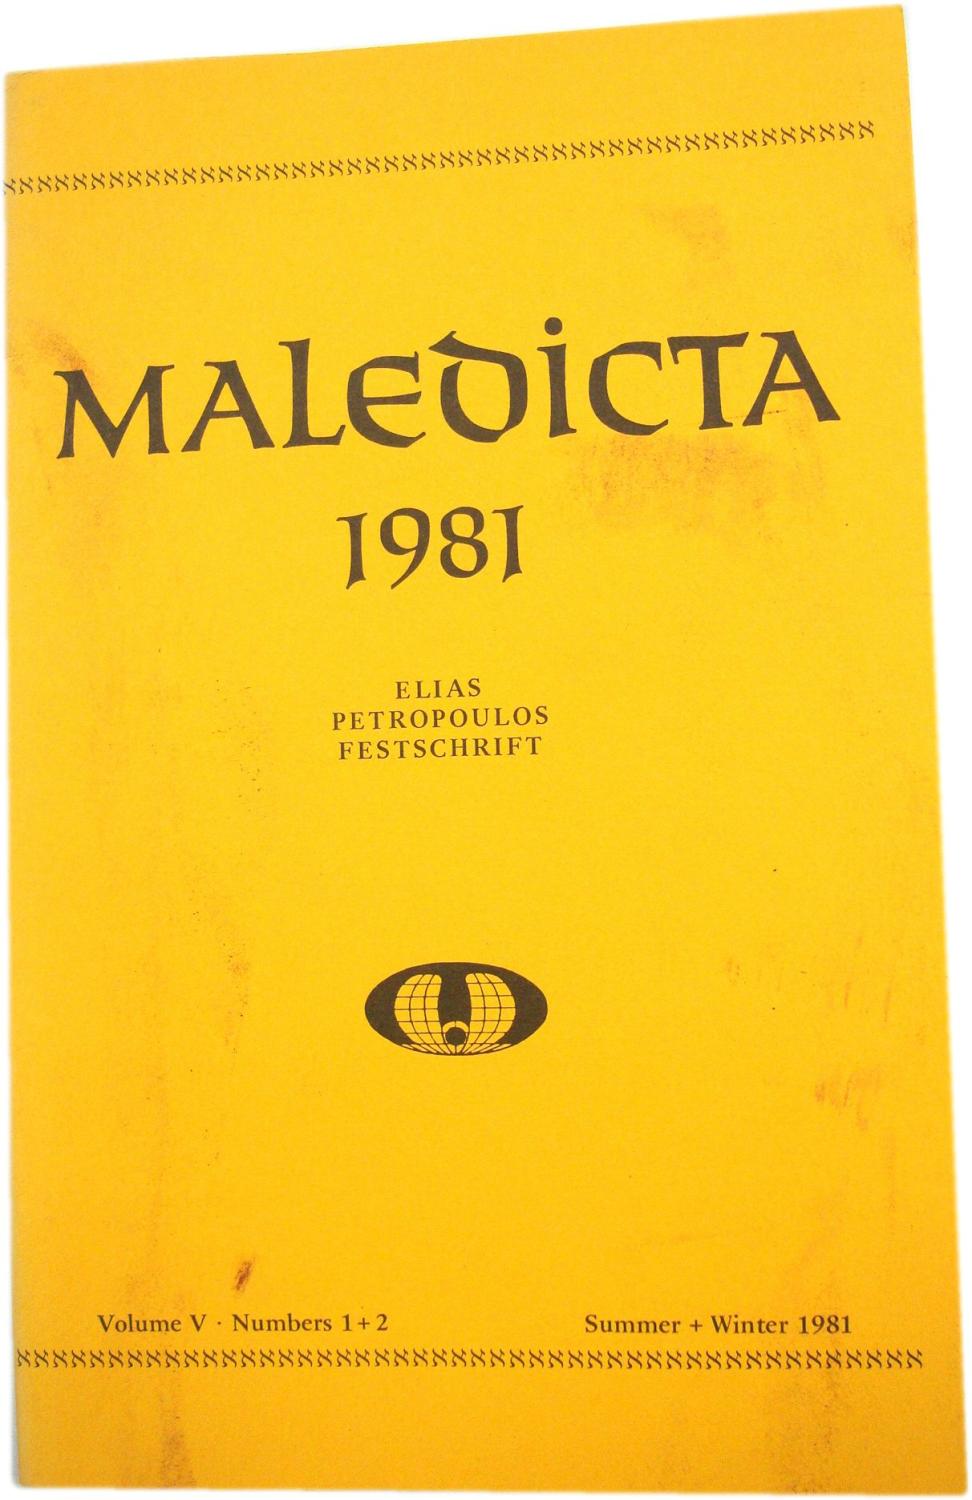 Maledicta: The International Journal of Verbal Aggression: Volume V, Numbers 1 + 2, Summer + Winter 1981 - Aman, Reinhold (Ed.)